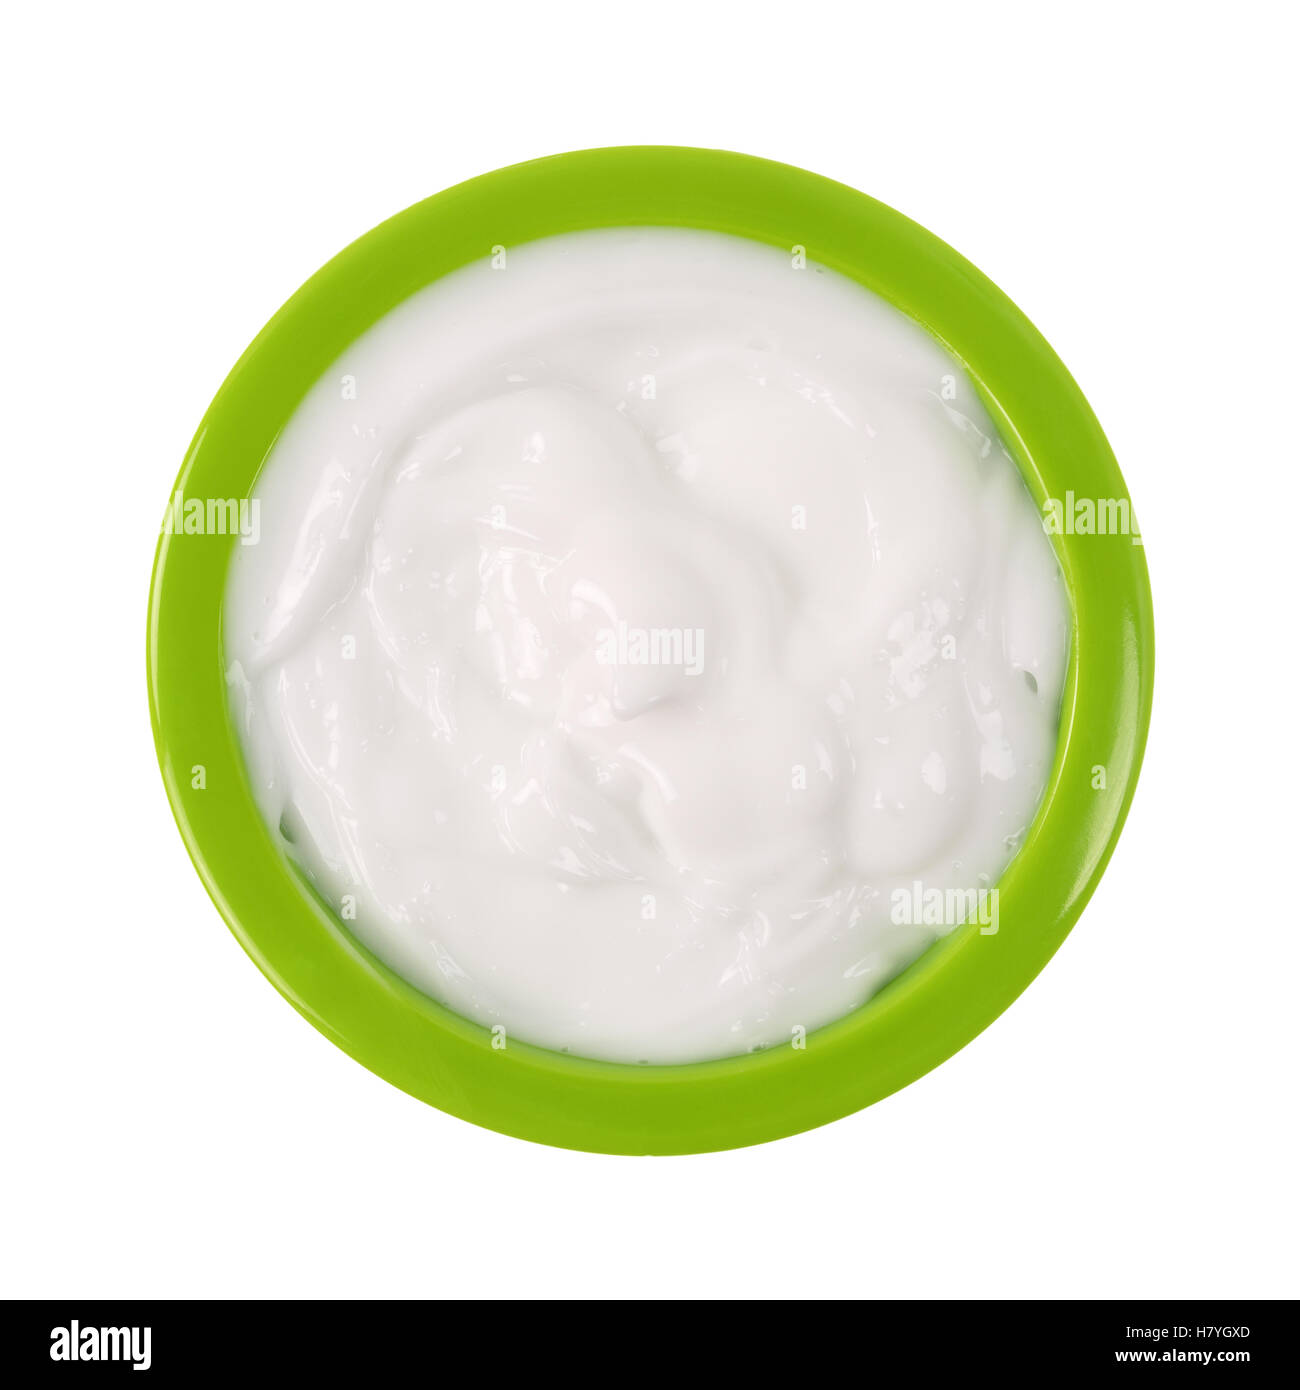 Top view of a small green bowl filled with vitamin E lotion isolated on a white background. Stock Photo